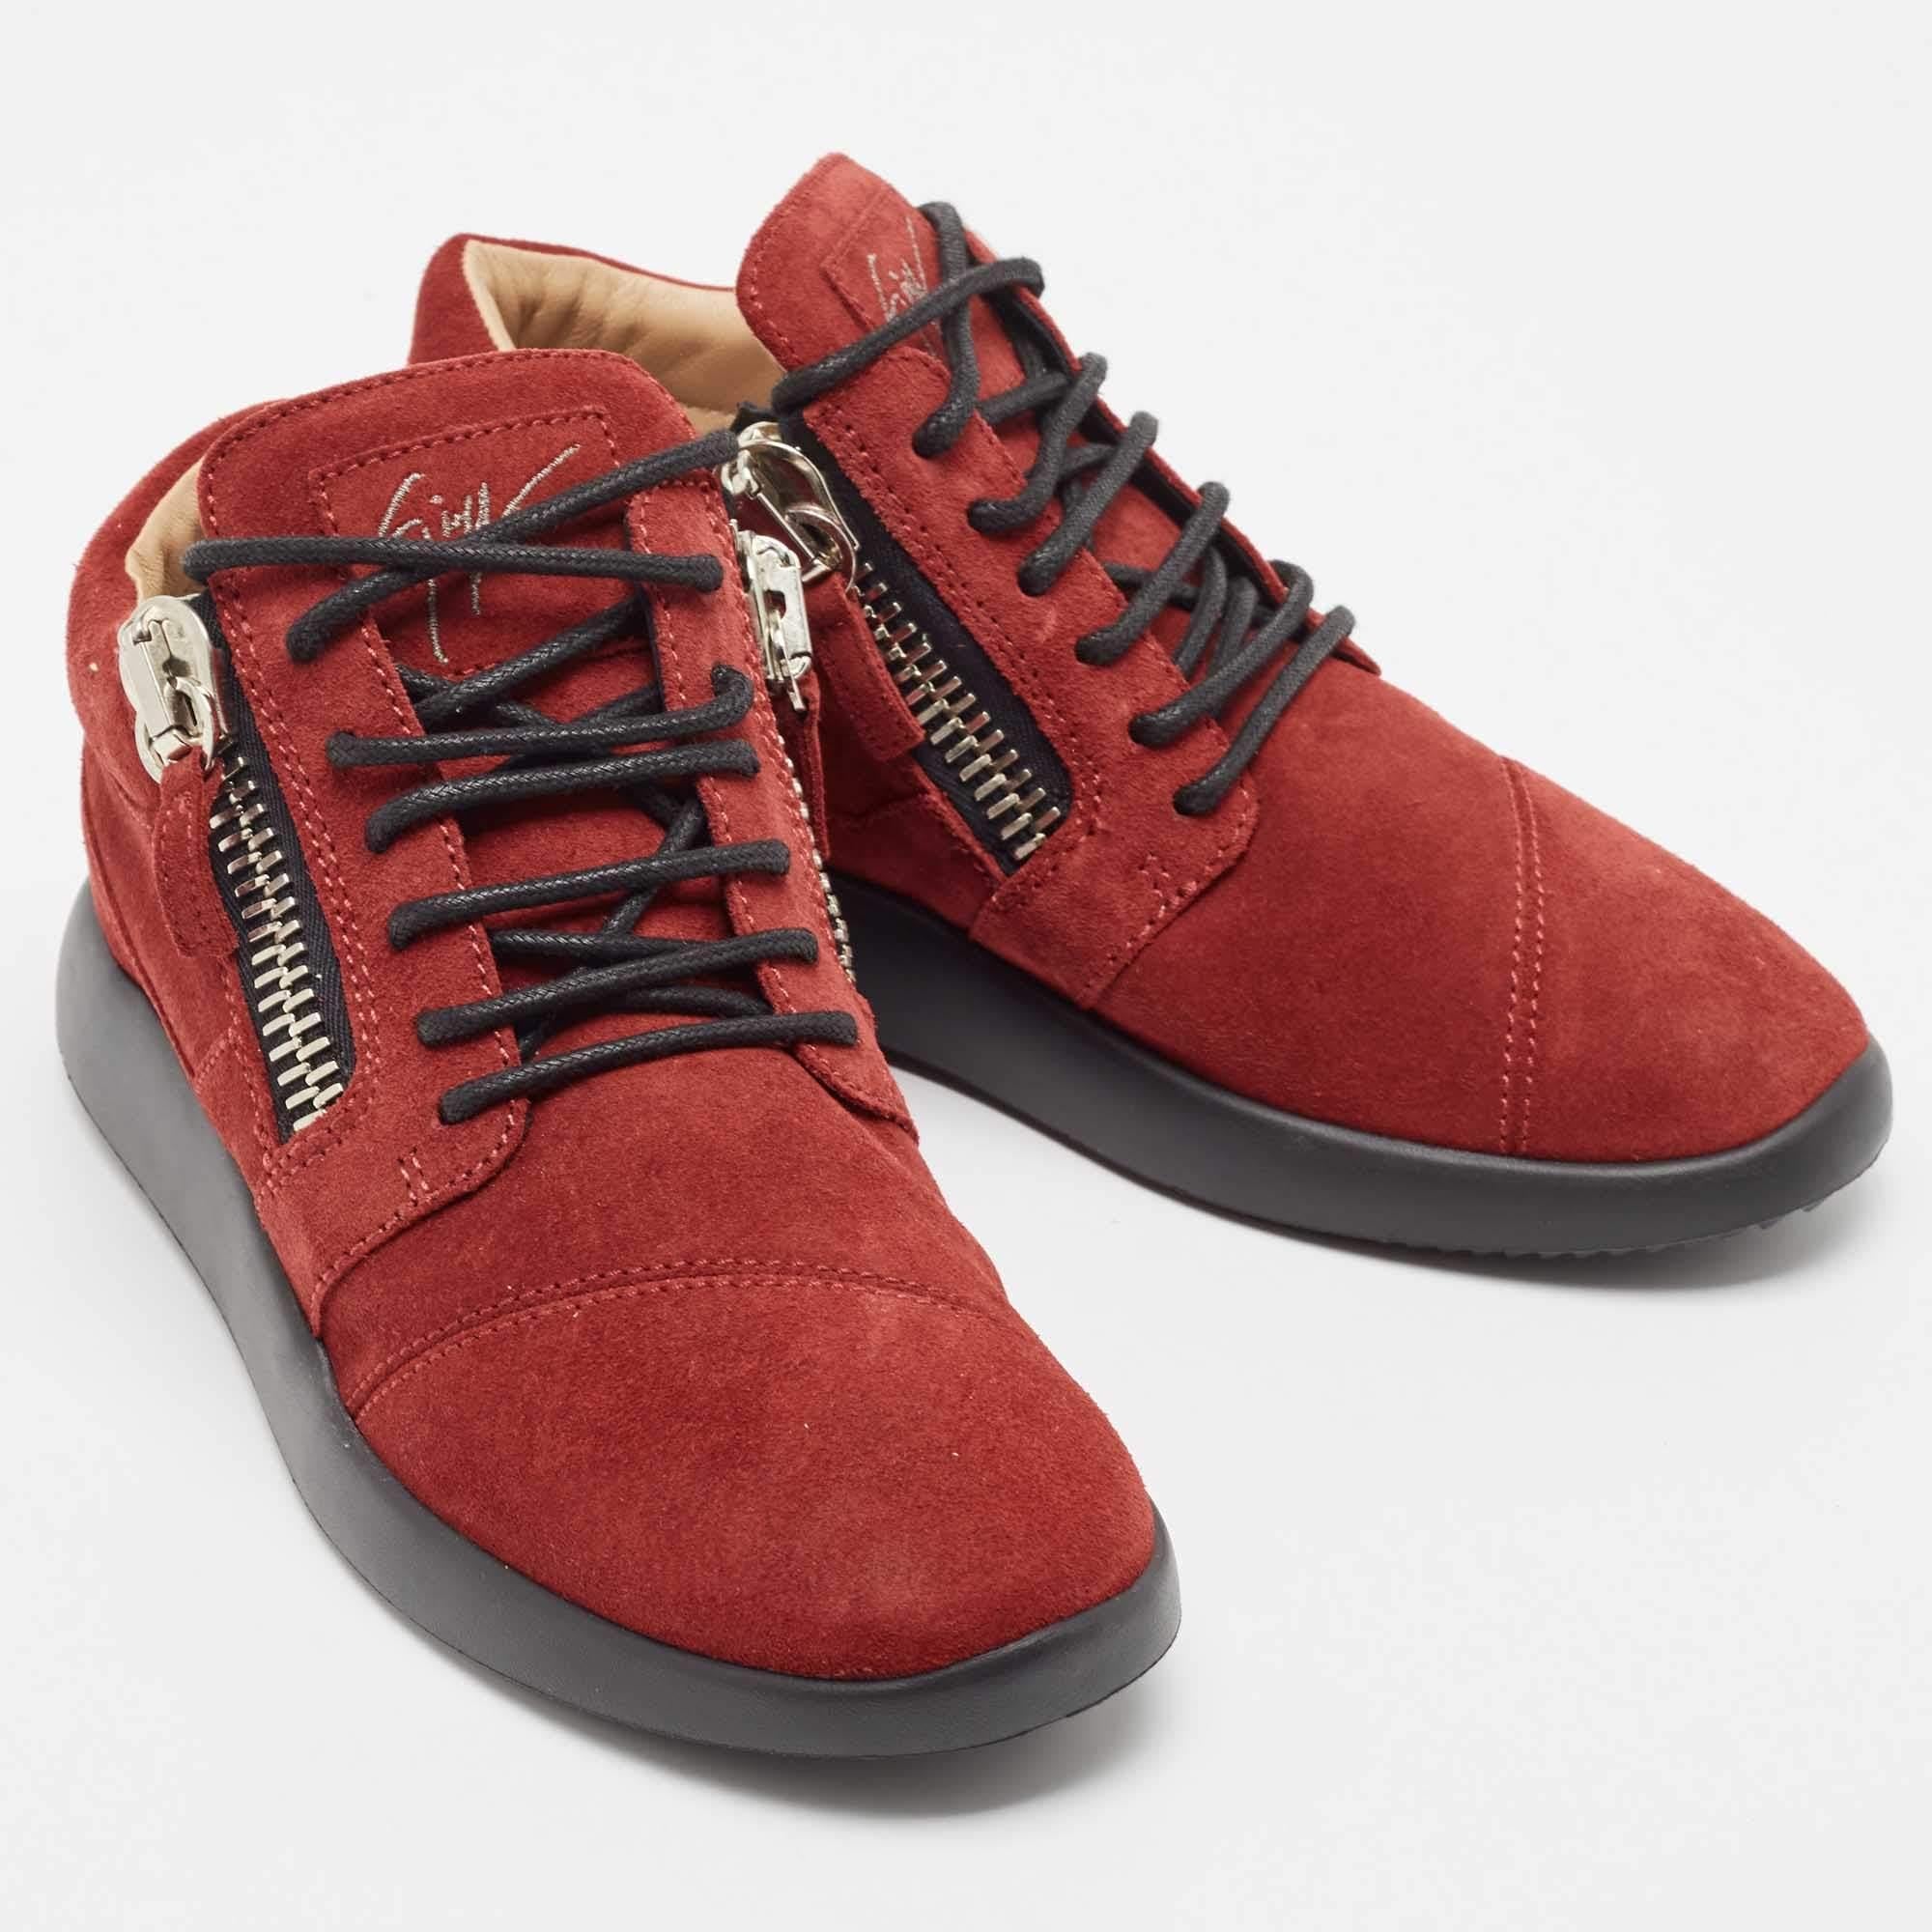 Gisueppe Zanotti Red Suede Double Zip Low Top Sneakers Size 38 For Sale 2